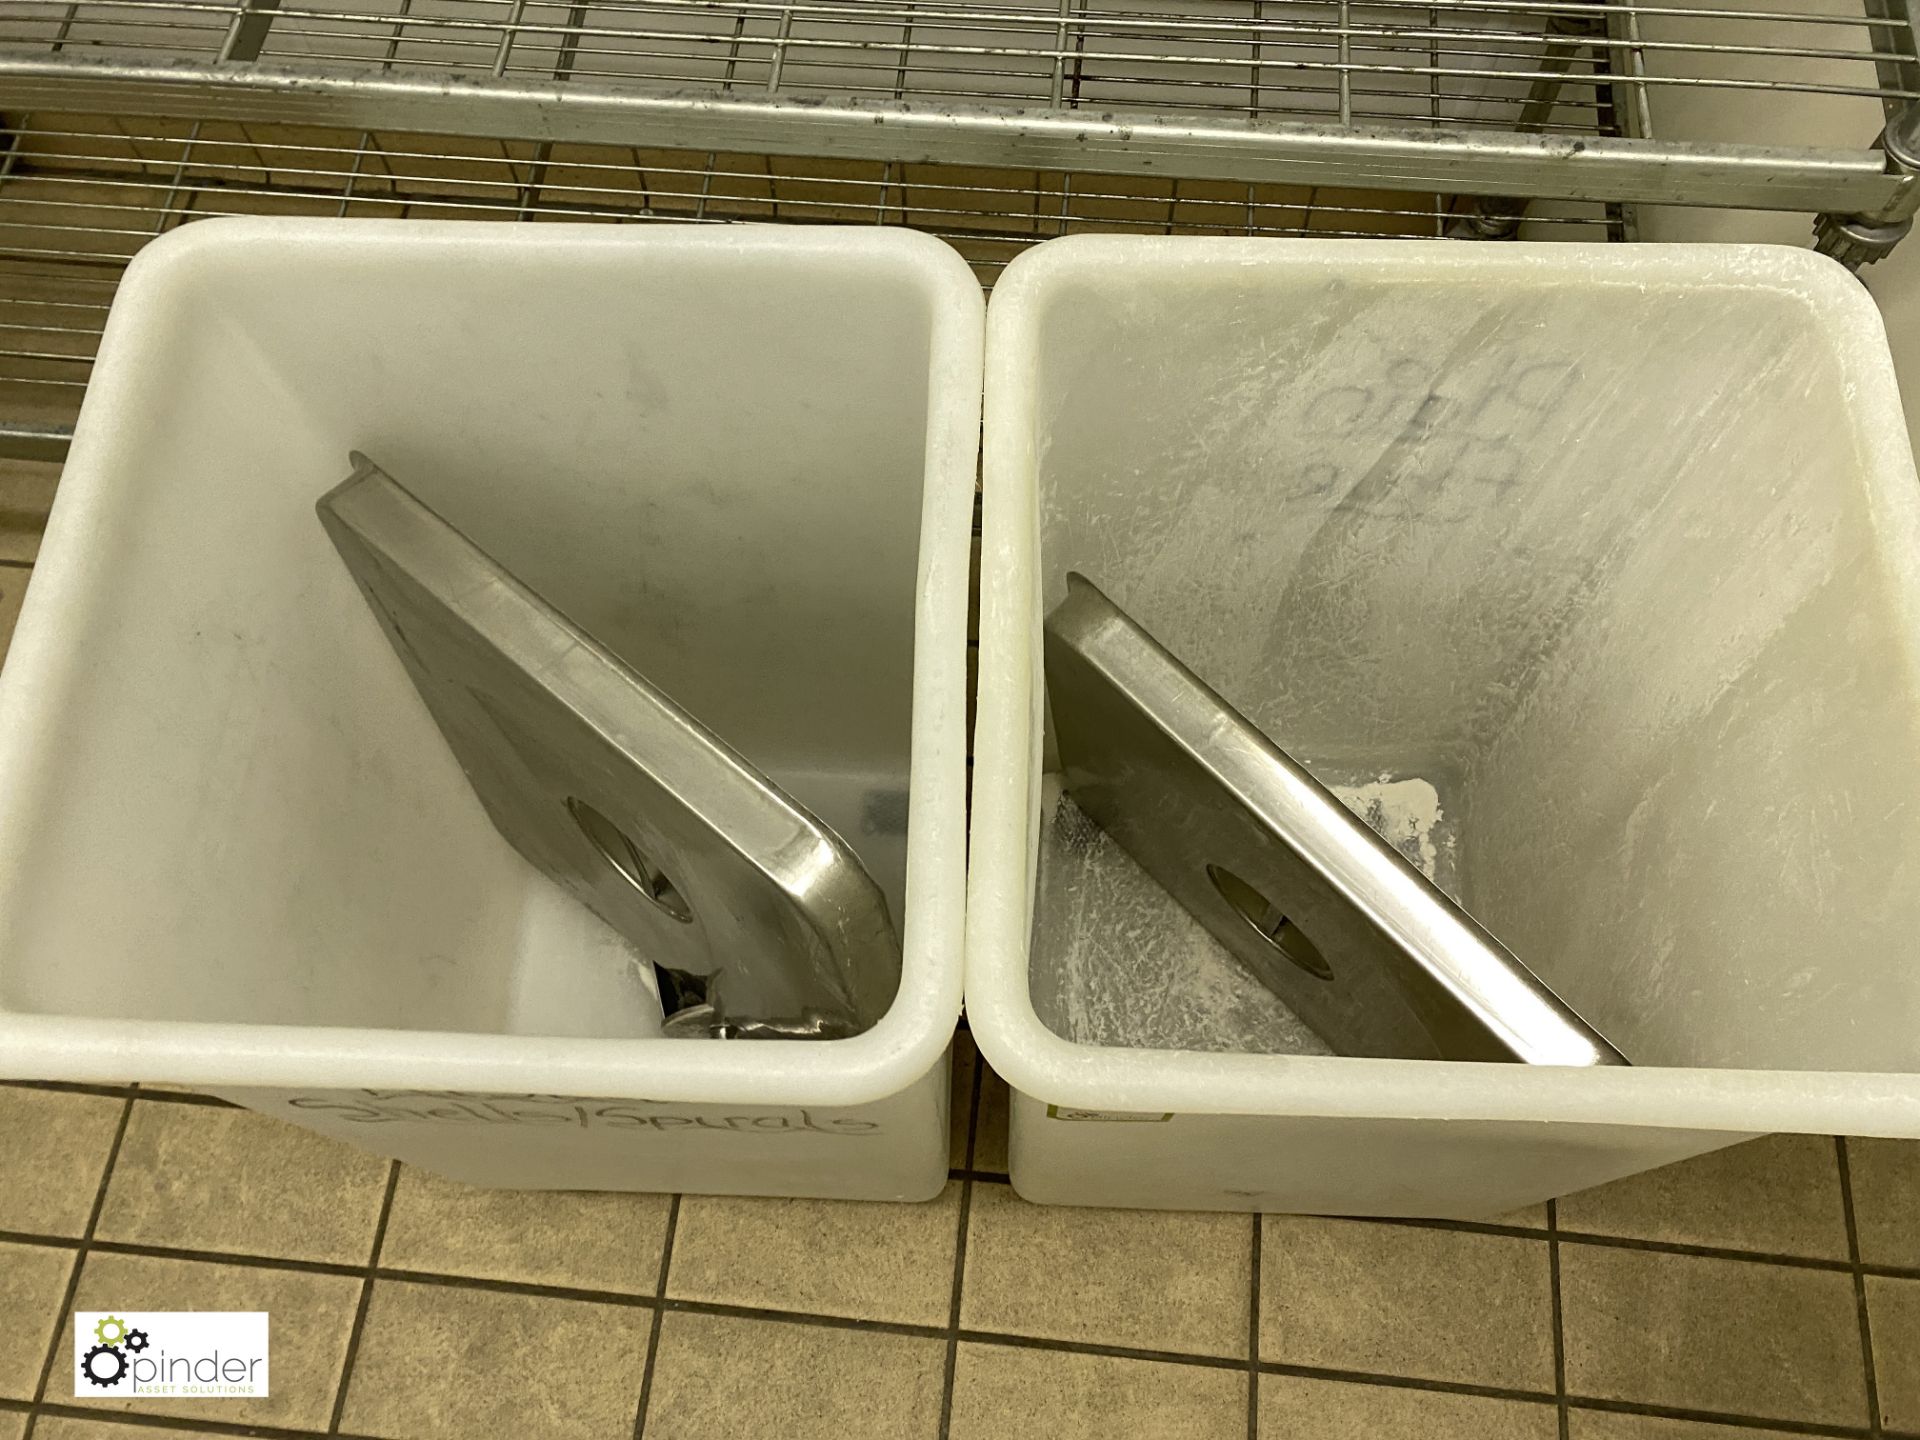 2 mobile Ingredient Bins, with lids - Image 2 of 2